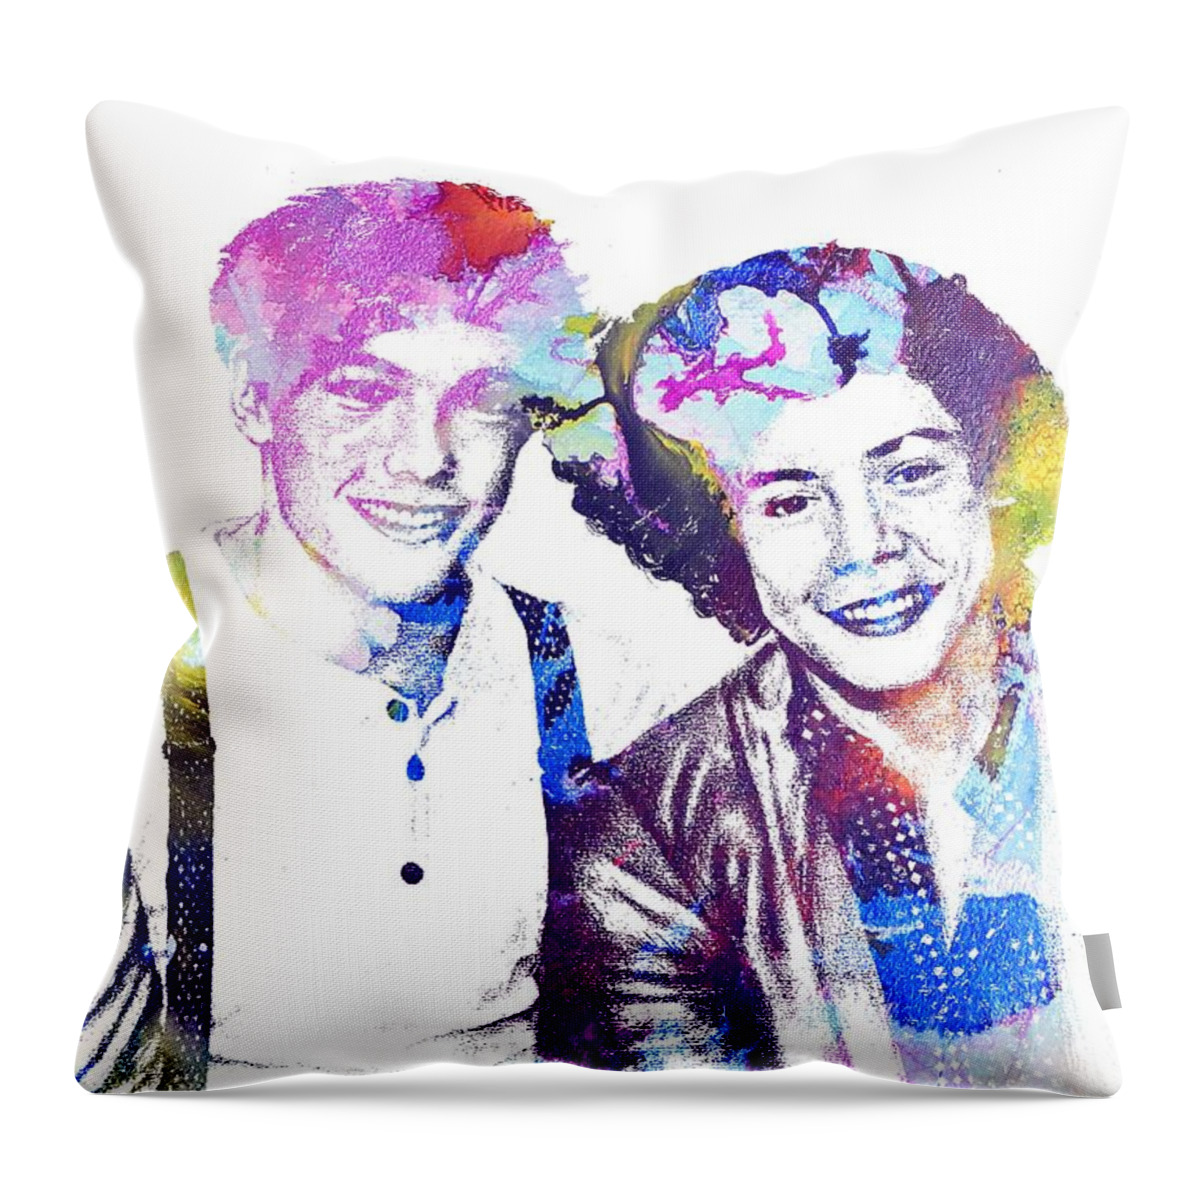 Vintage Group One Direction Throw Pillow by Doc Braham - Pixels